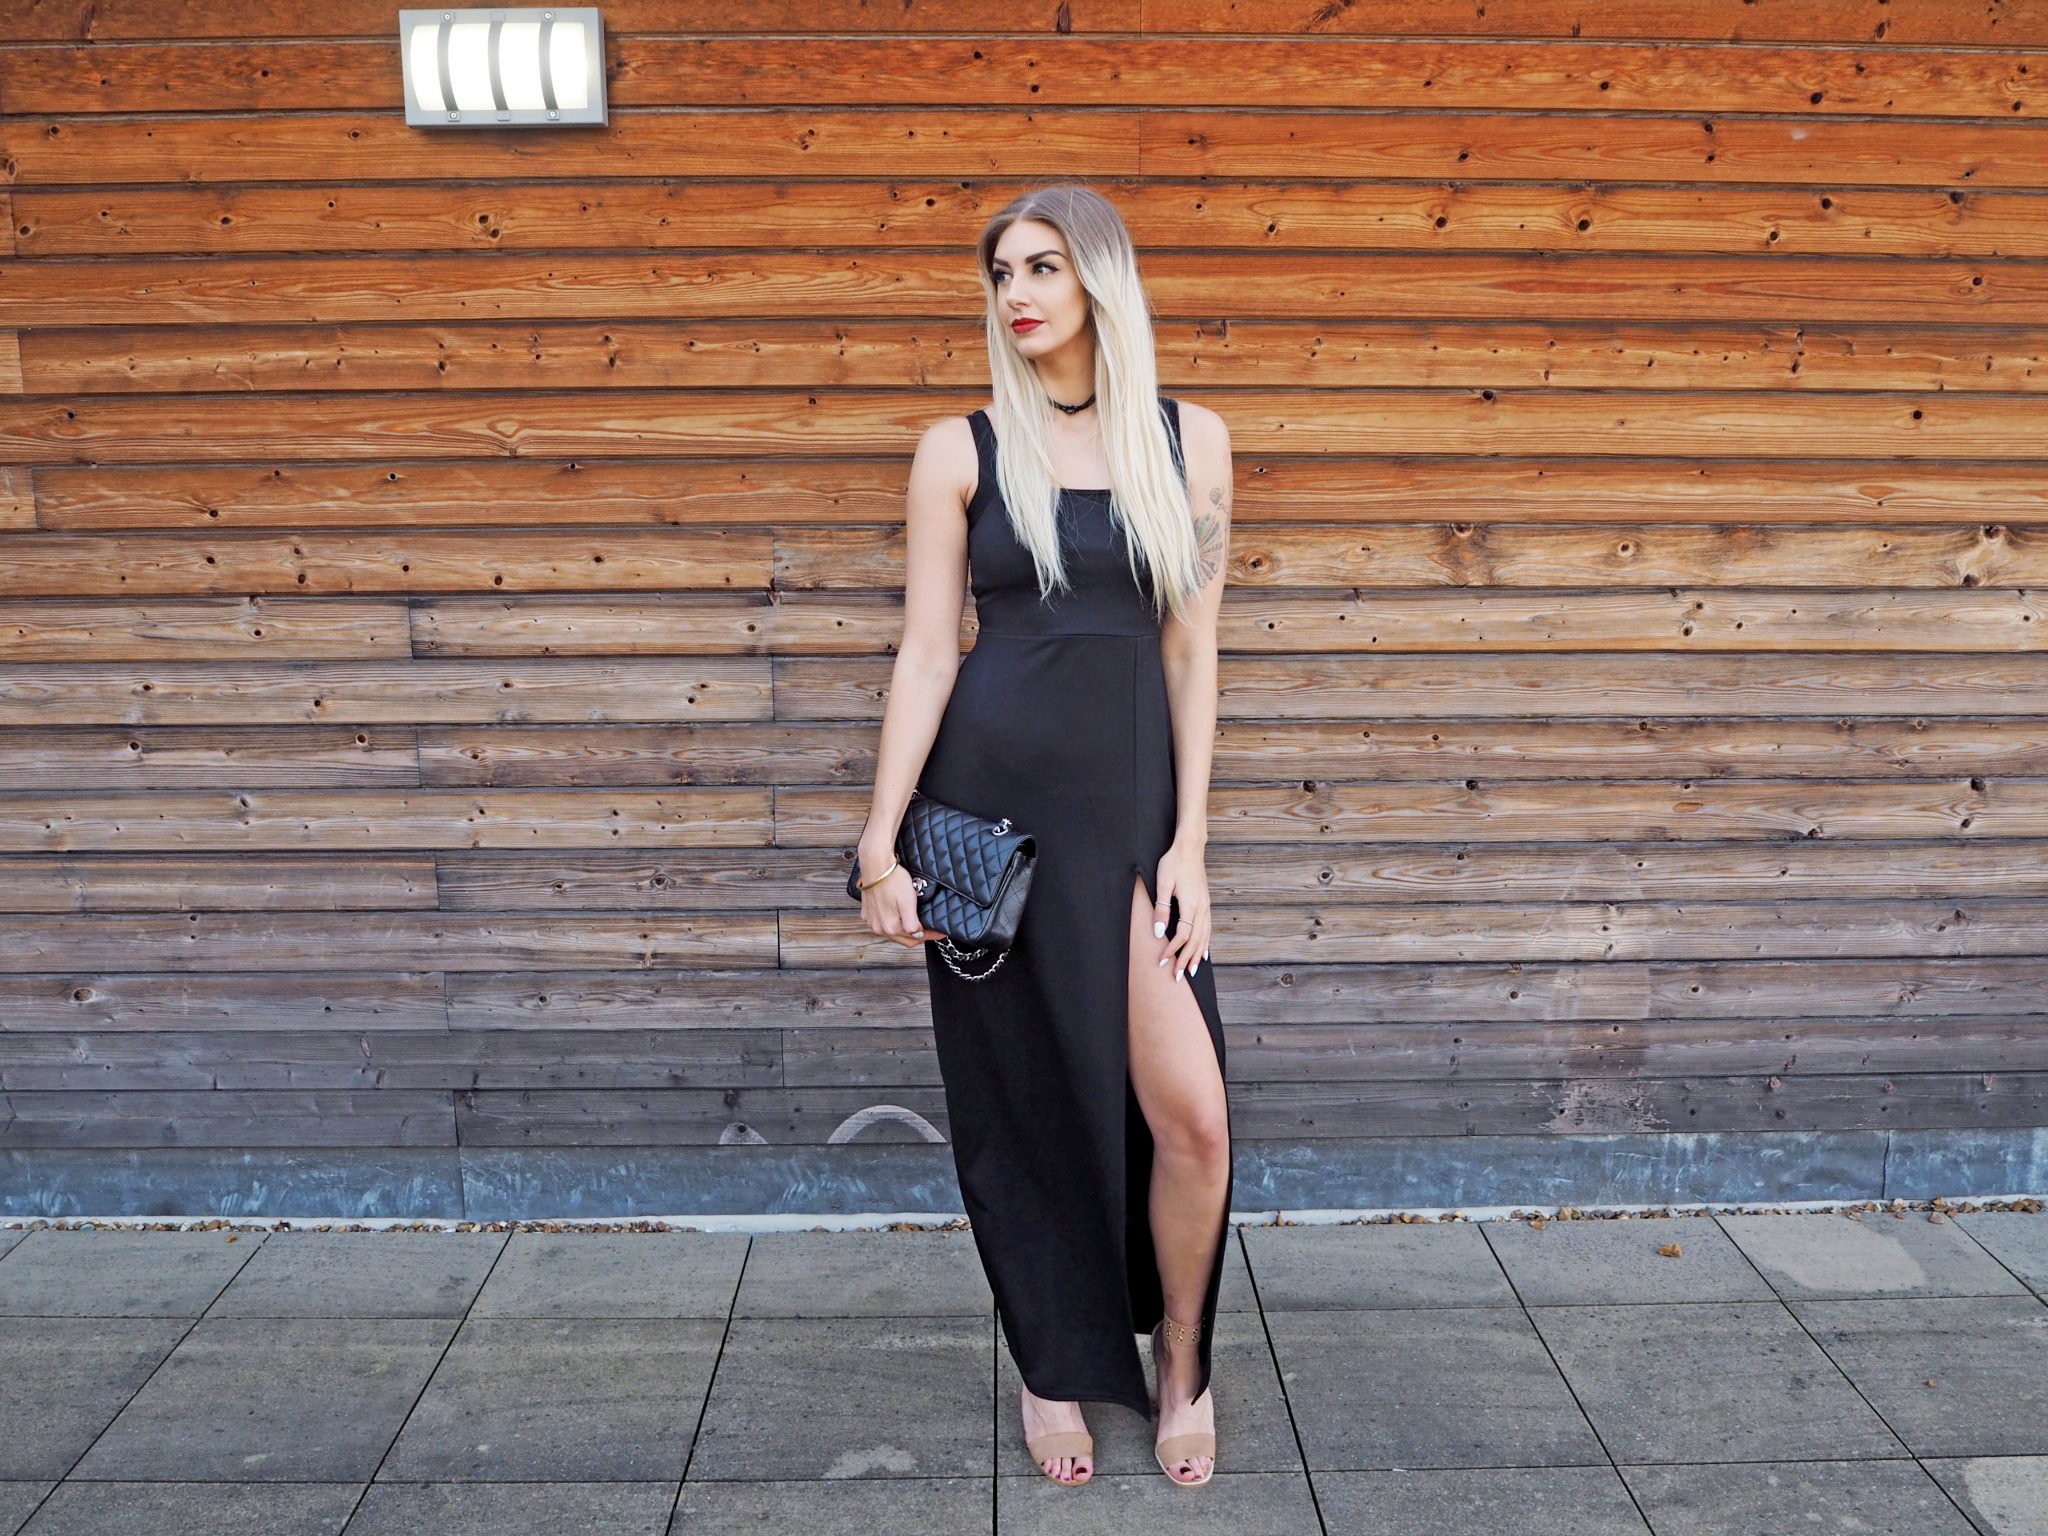 Laura Kate Lucas - Manchester Fashion, Lifestyle and Fitness Blogger | Prettly Little Thing #PLTBloggers Collaboration Dress Collection